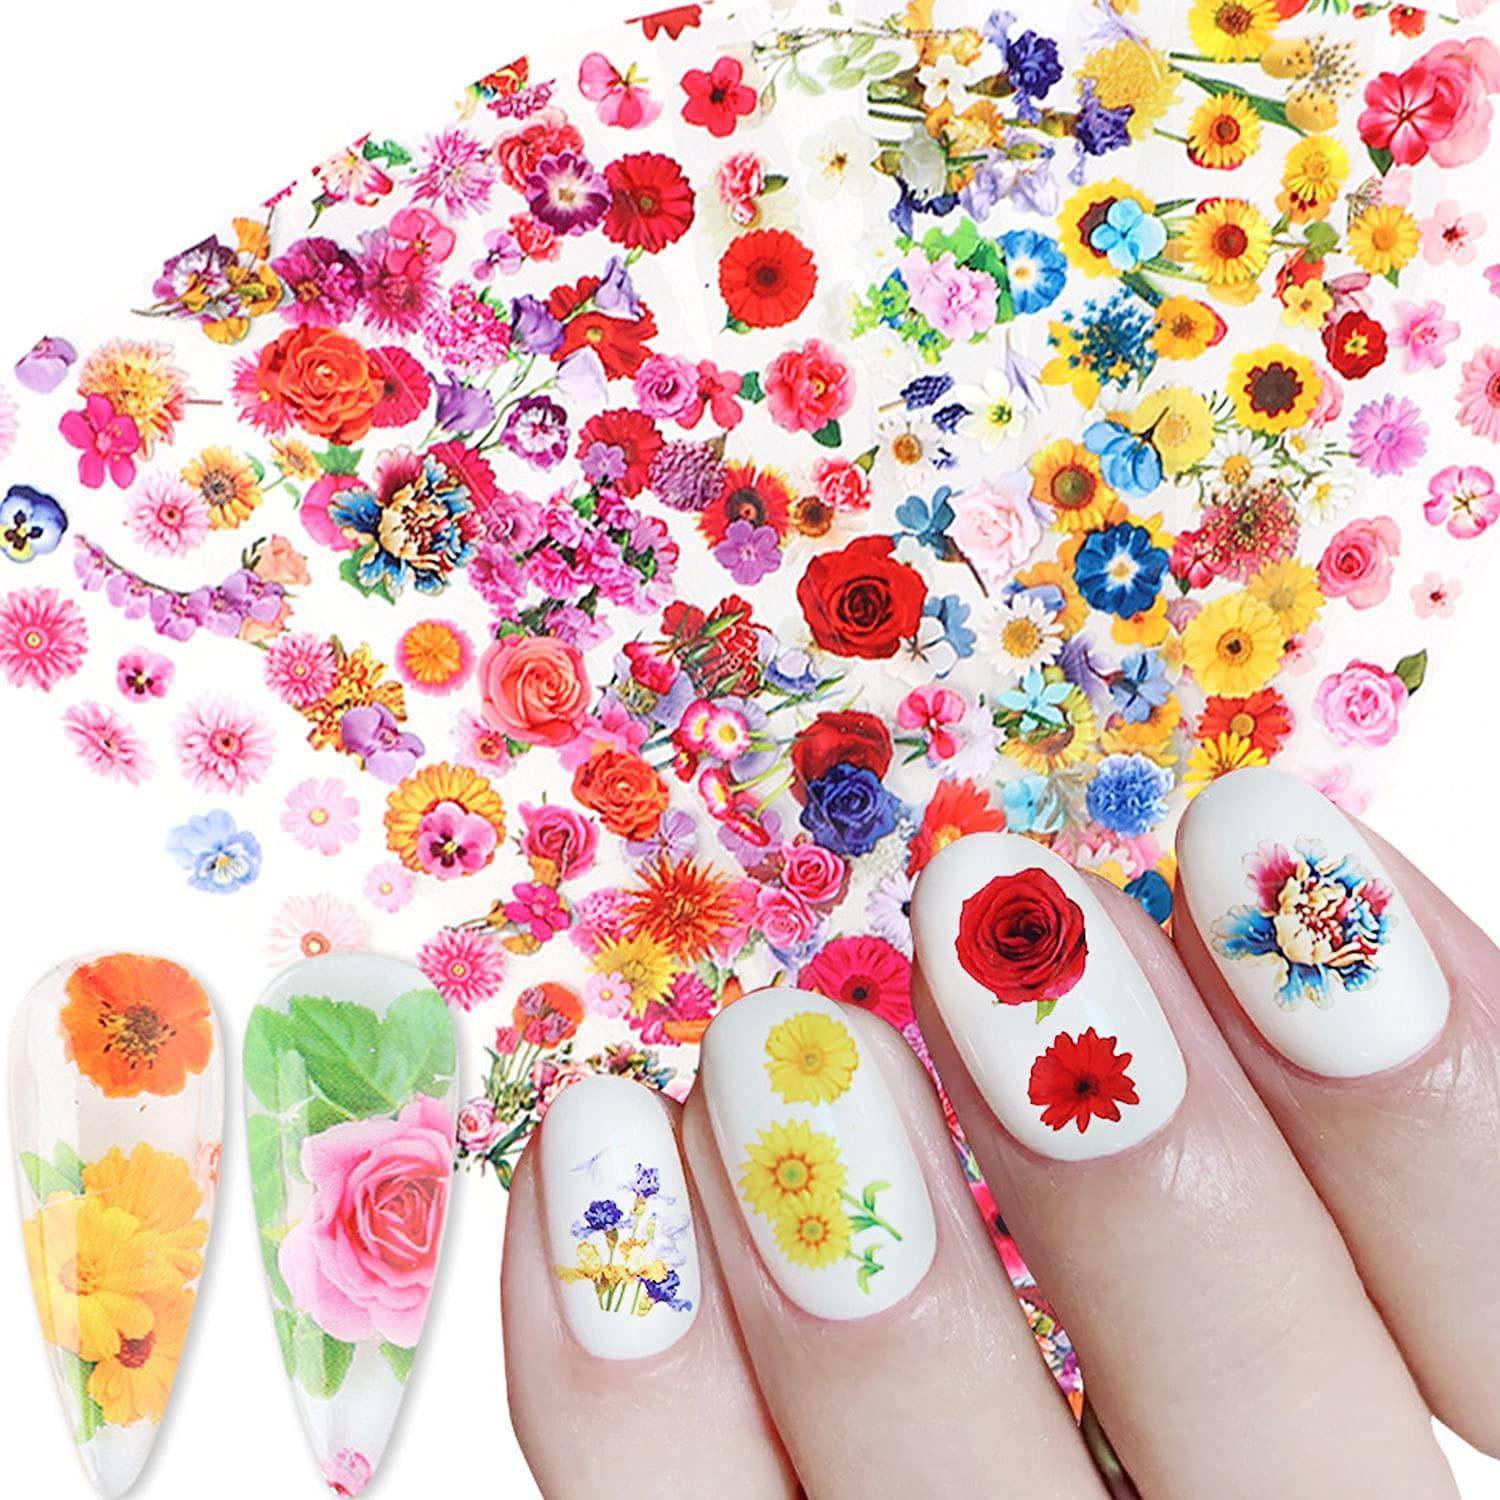 Natural Mix Dried Flowers Nail Decorations Jewelry Natural Floral Leaf  Stickers 3d Nail Art Designs Polish Manicure Accessories